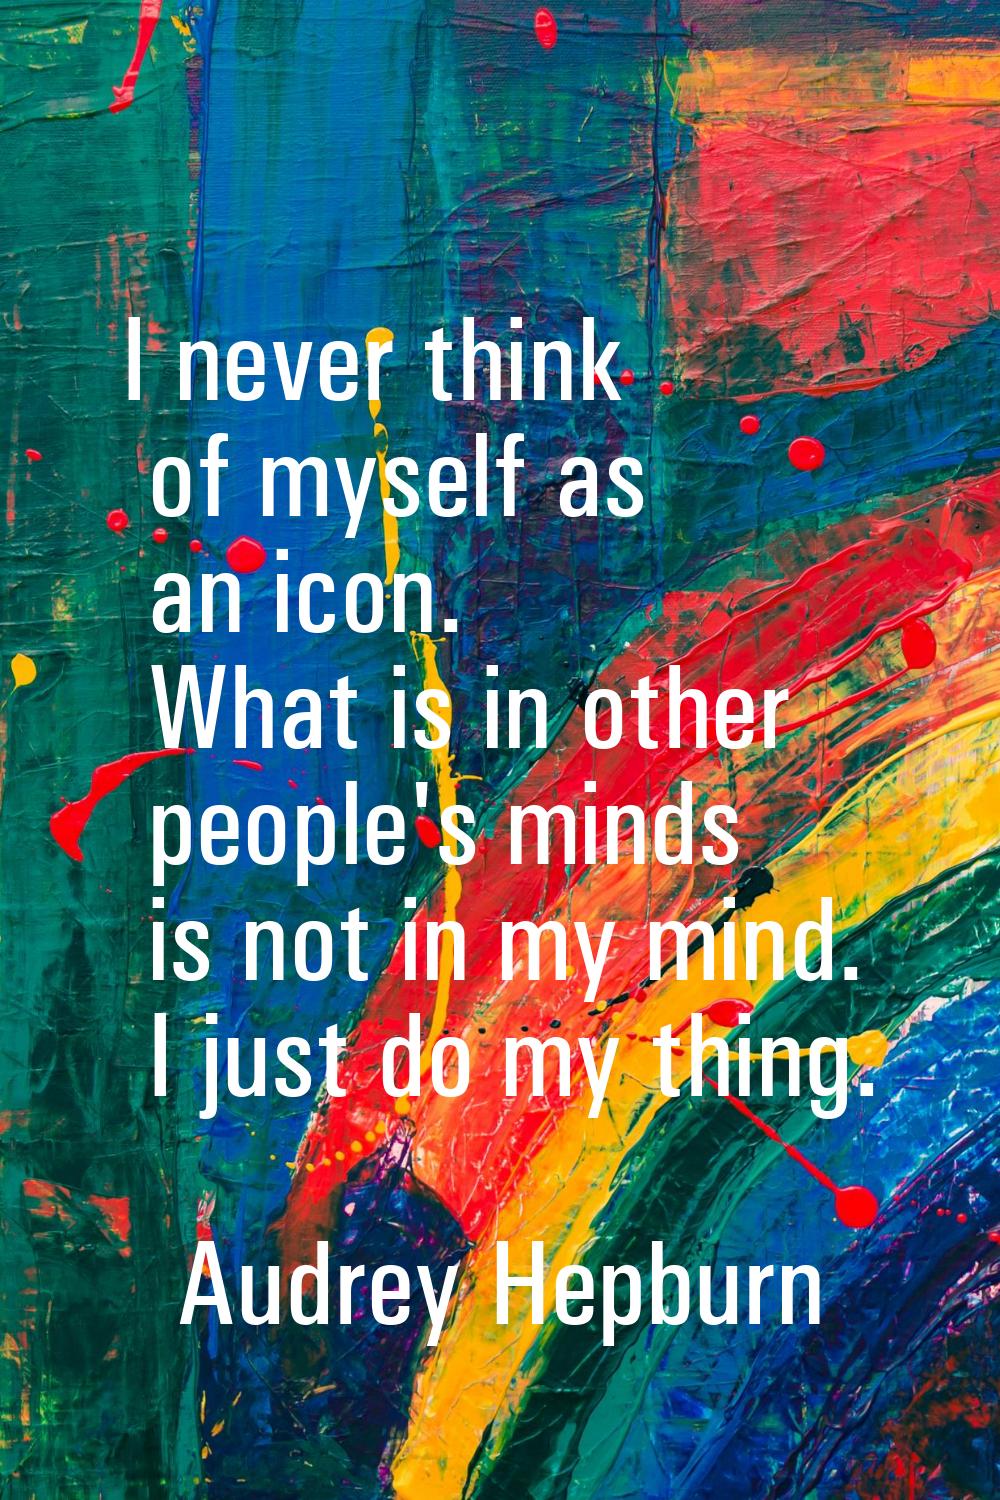 I never think of myself as an icon. What is in other people's minds is not in my mind. I just do my